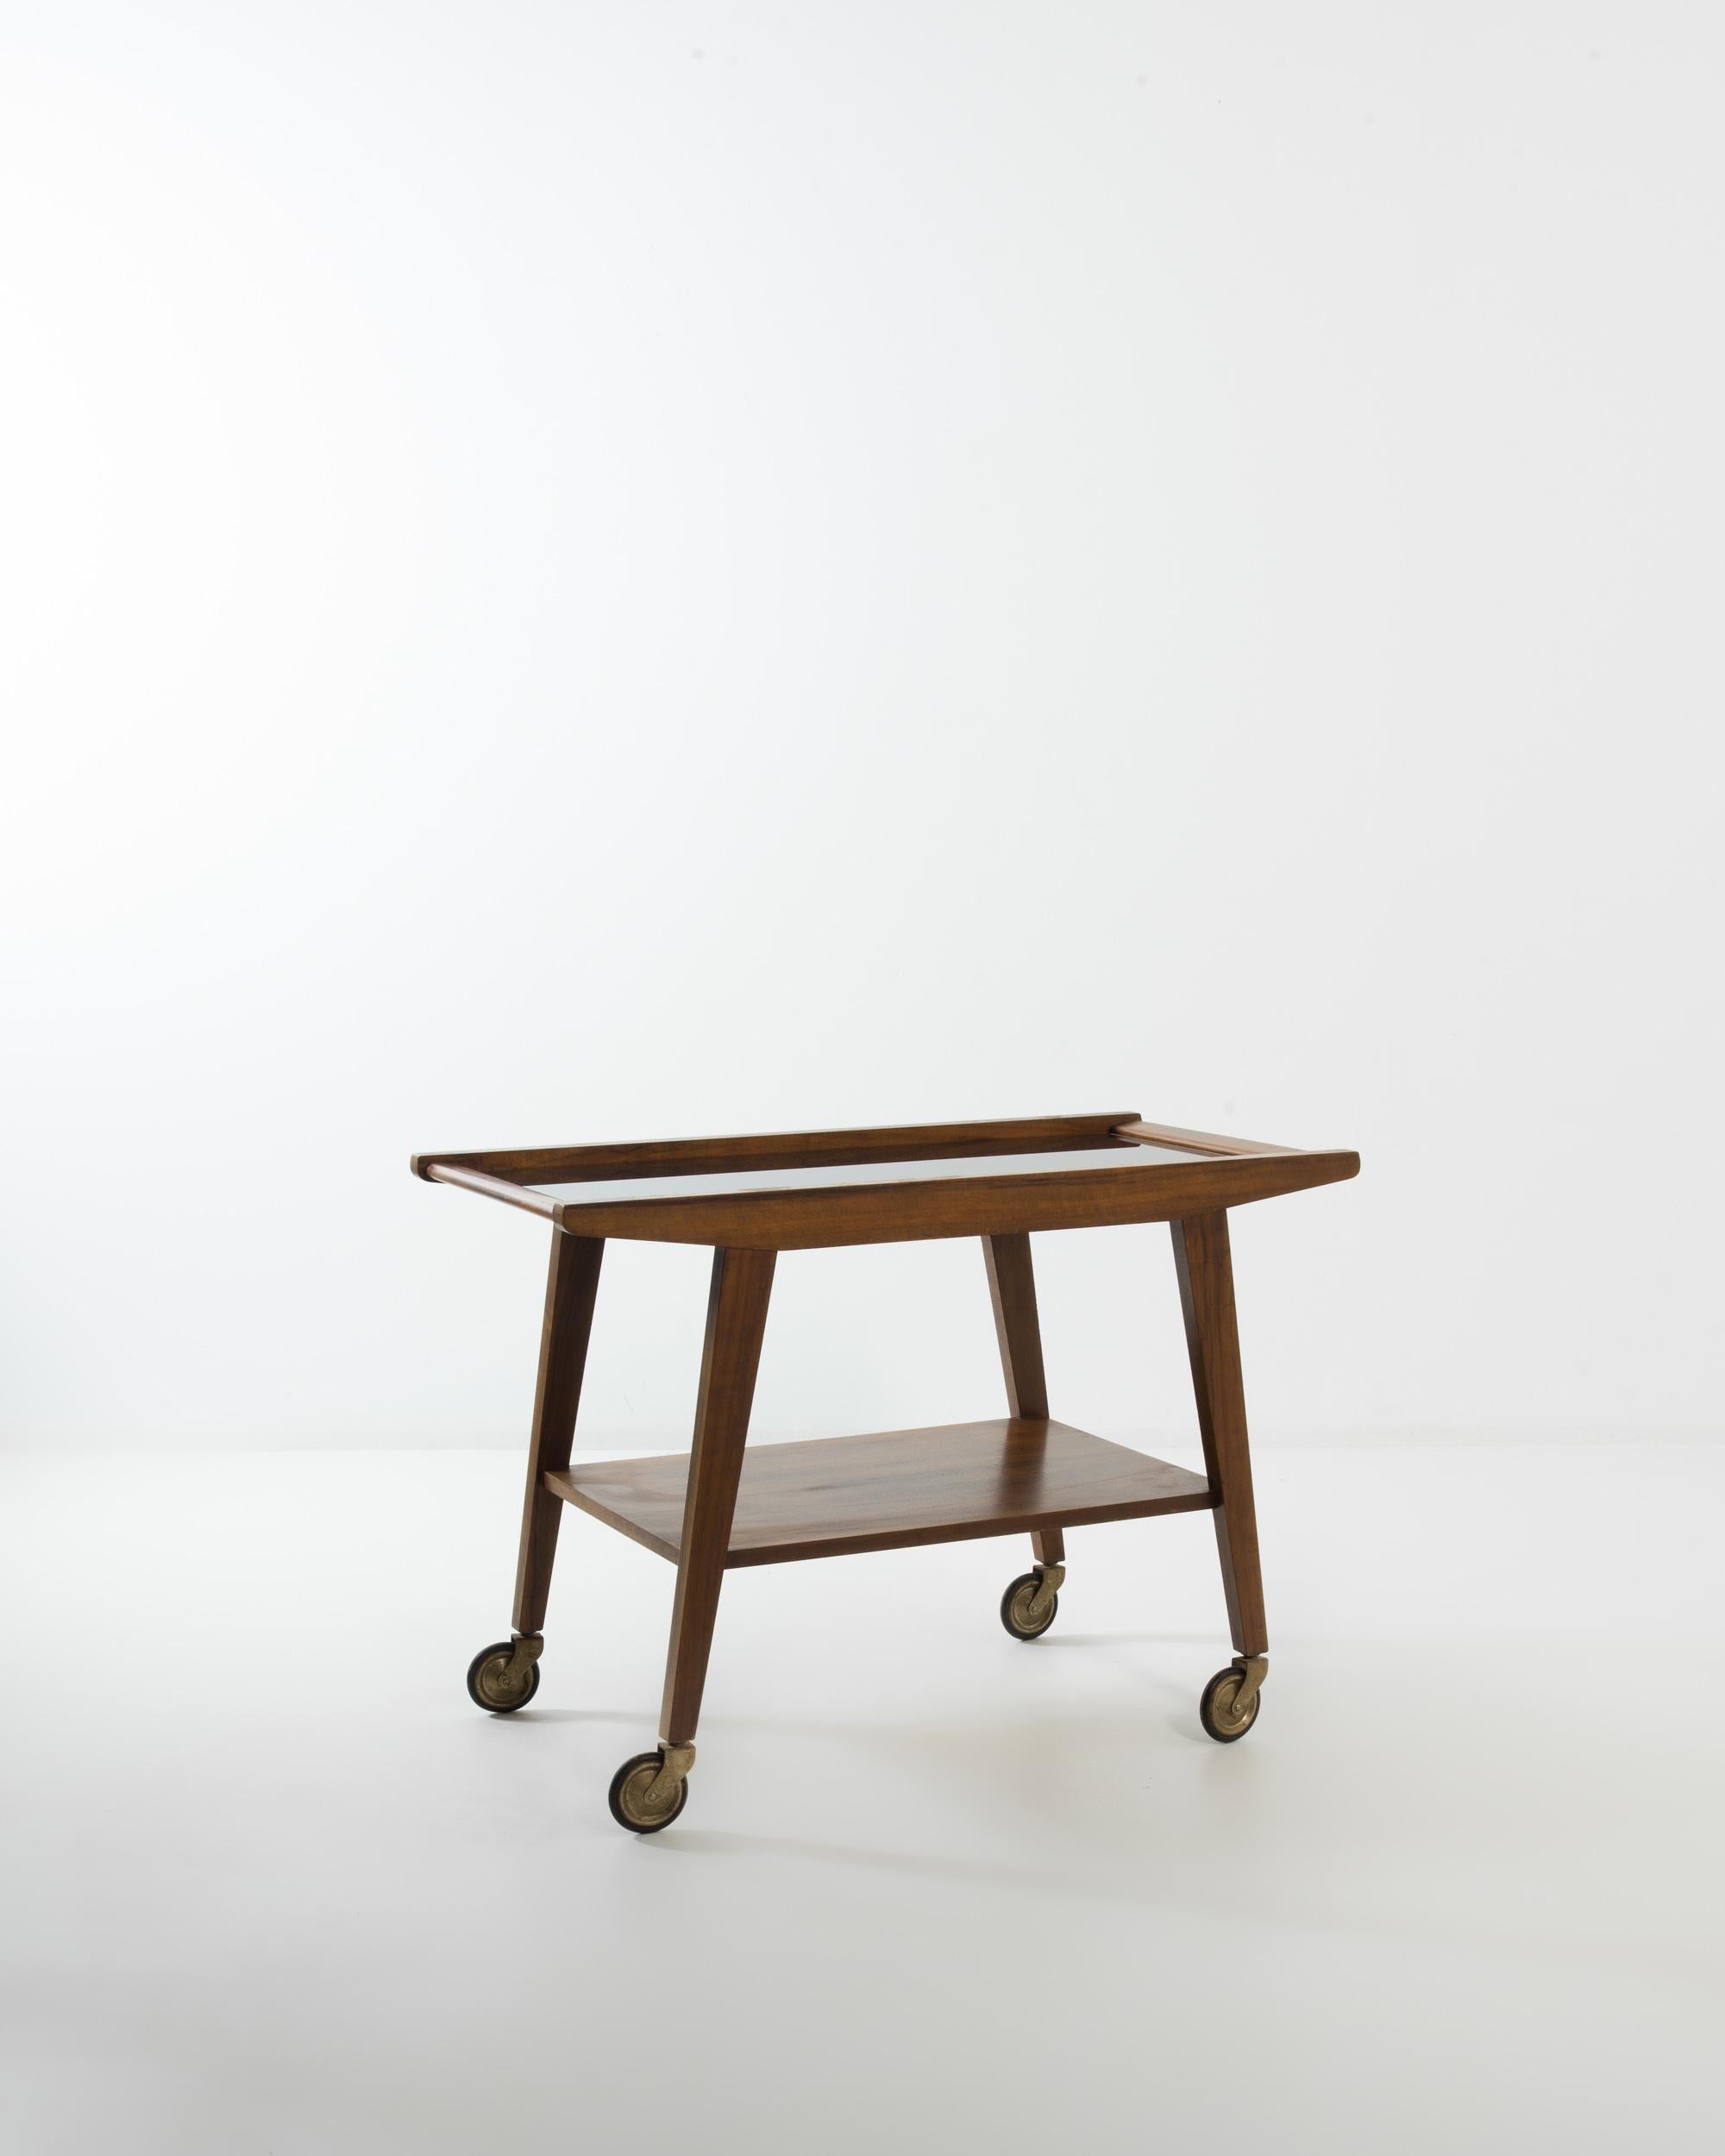 This beautiful Modernist bar cart is sure to become a treasured fixture in your home. Made in 20th century France, a streamlined design in warm, auburn-colored wood evokes a sense of leisure and ease. Tapered legs atop metal wheels form a trapezoid